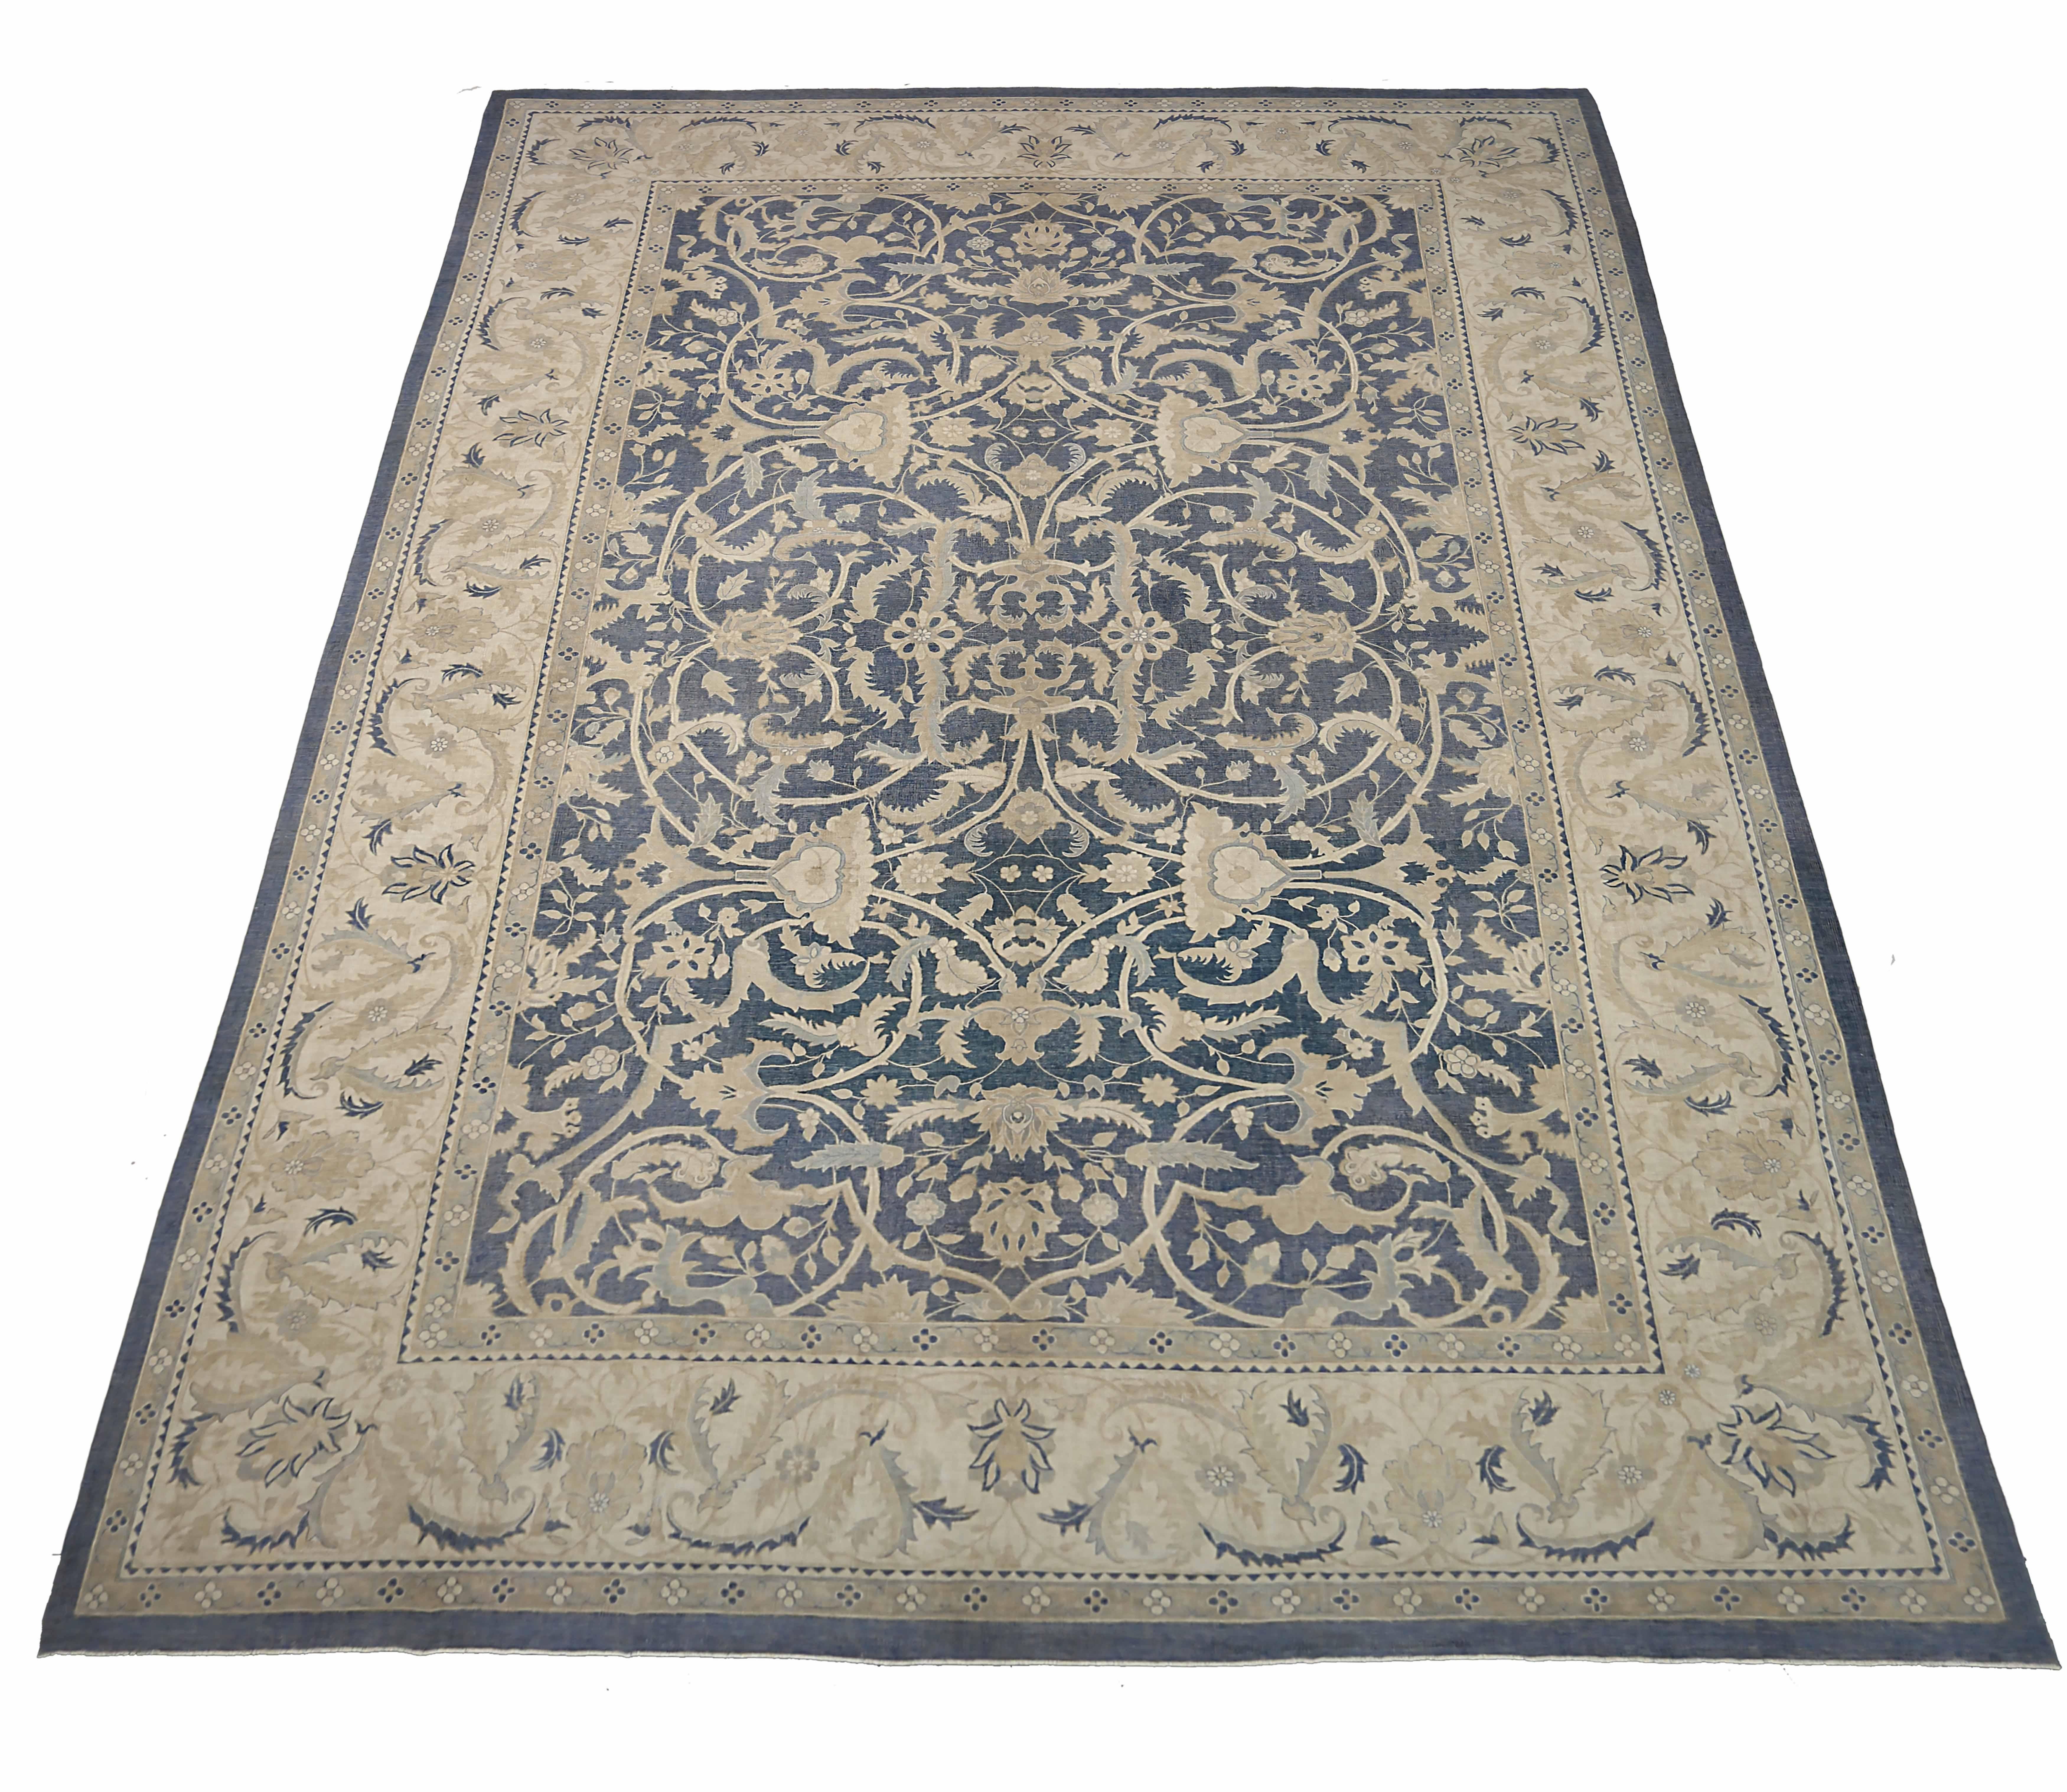 New Afghan area rug handwoven from the finest sheep’s wool. It’s colored with all-natural vegetable dyes that are safe for humans and pets. It’s a traditional Haji Jalili design handwoven by expert artisans.It’s a lovely area rug that can be